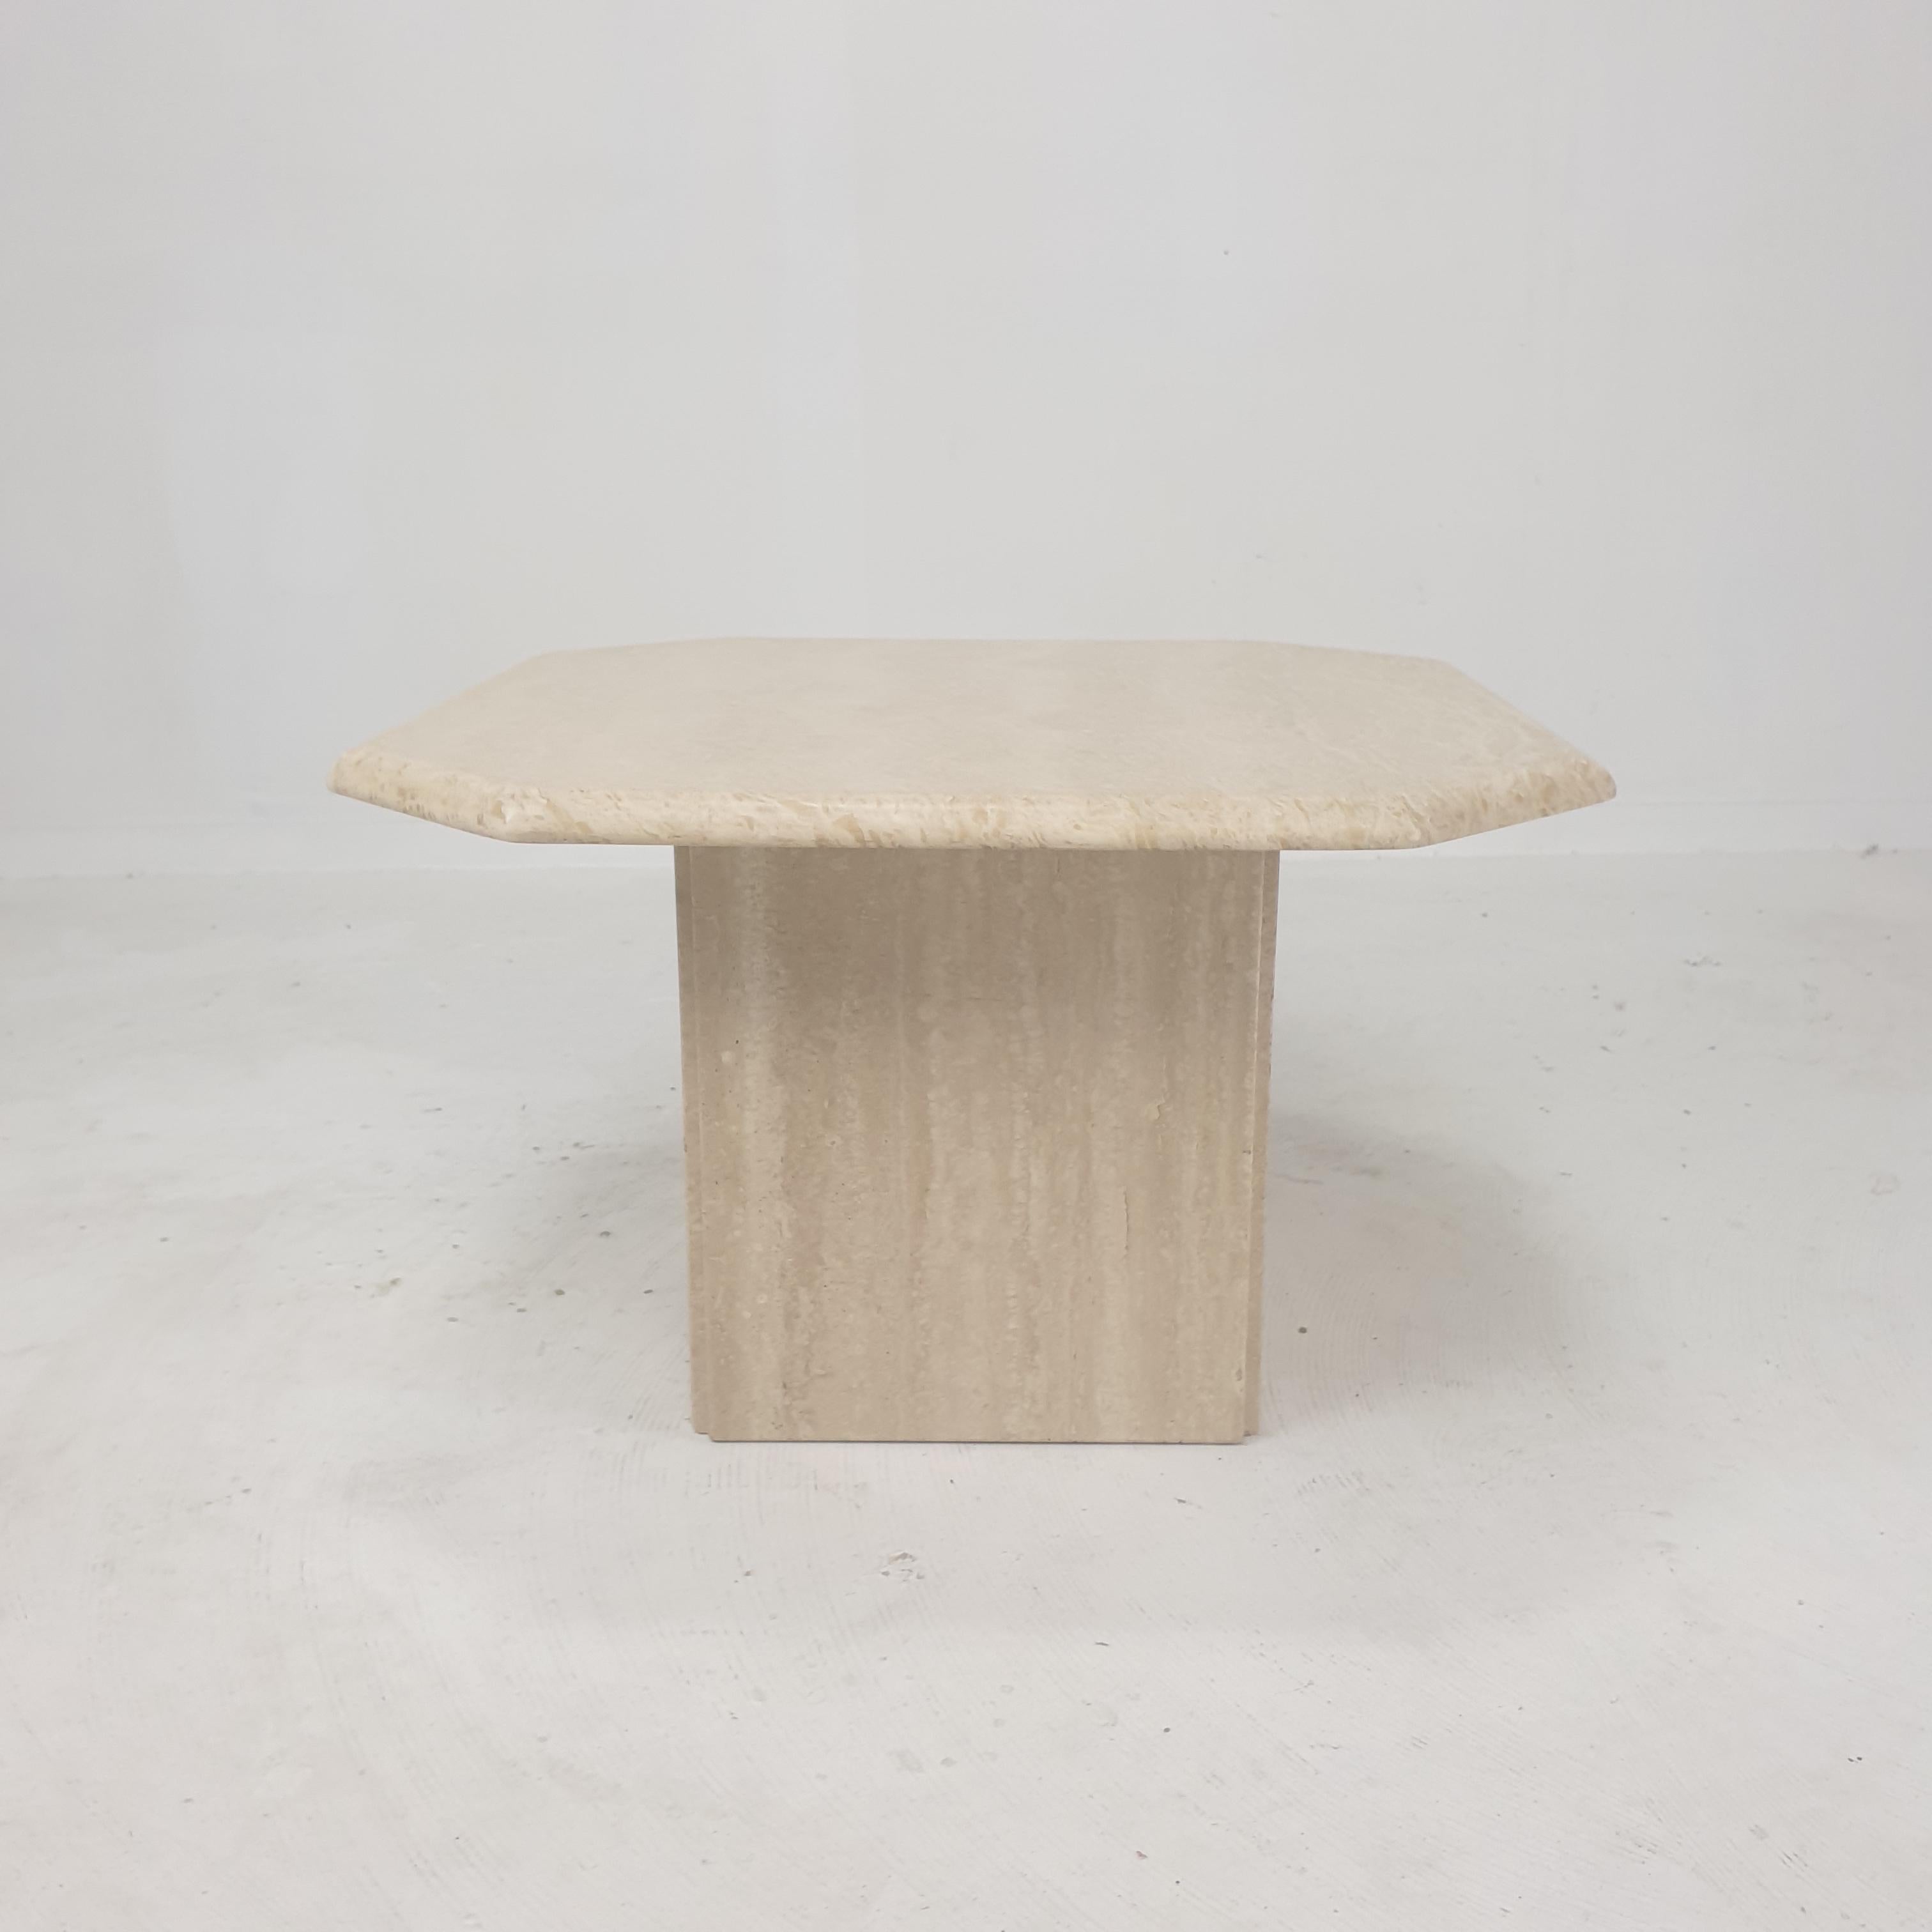 Very nice Italian coffee table handcrafted out of travertine, 1980's.

It is made of beautiful travertine.

It has the normal traces of use, see the pictures.

We work with professional packers and shippers, we ship worldwide.